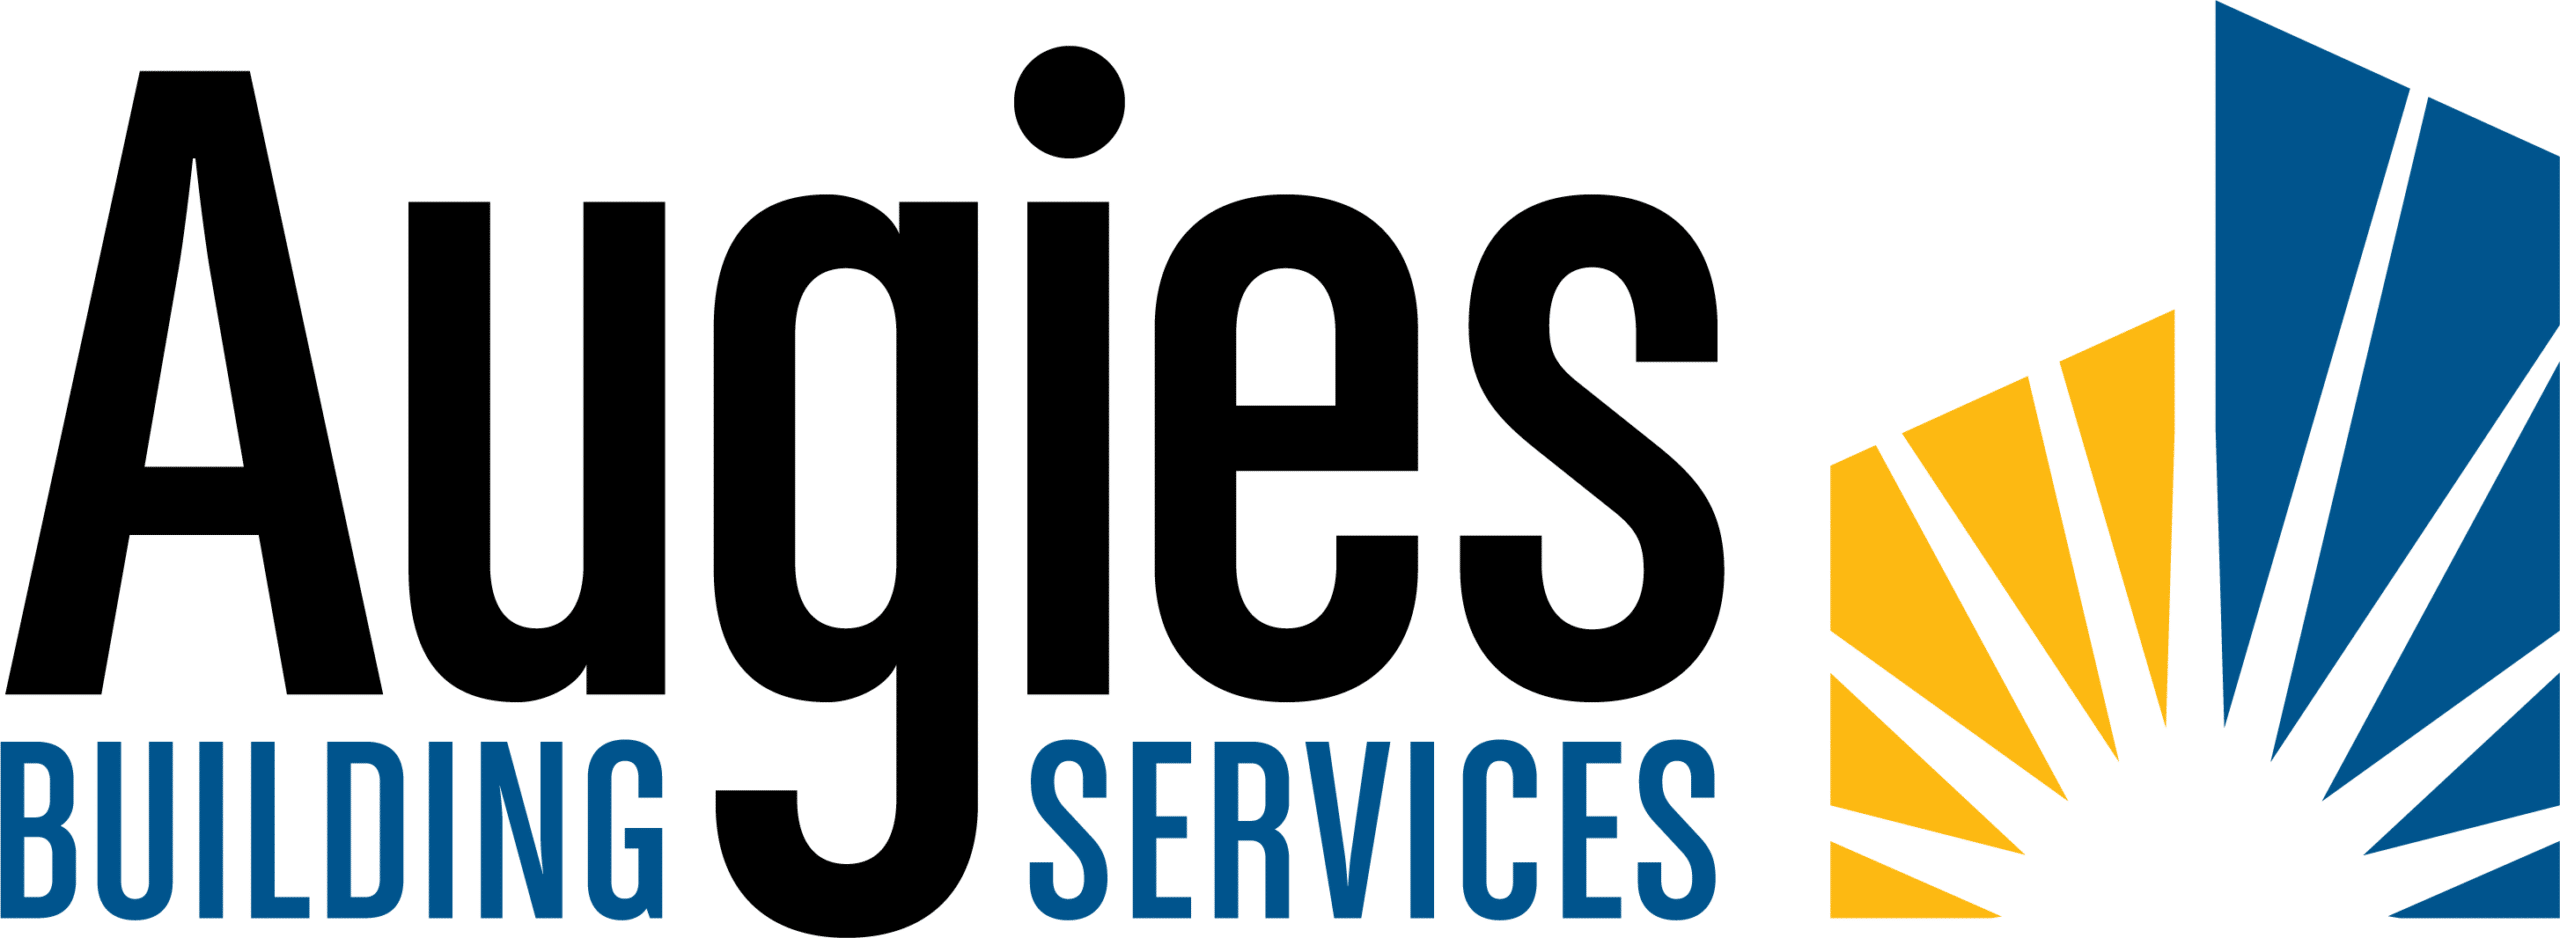 events Archive - Christian Business Round Table | Augies Janitorial Services : 